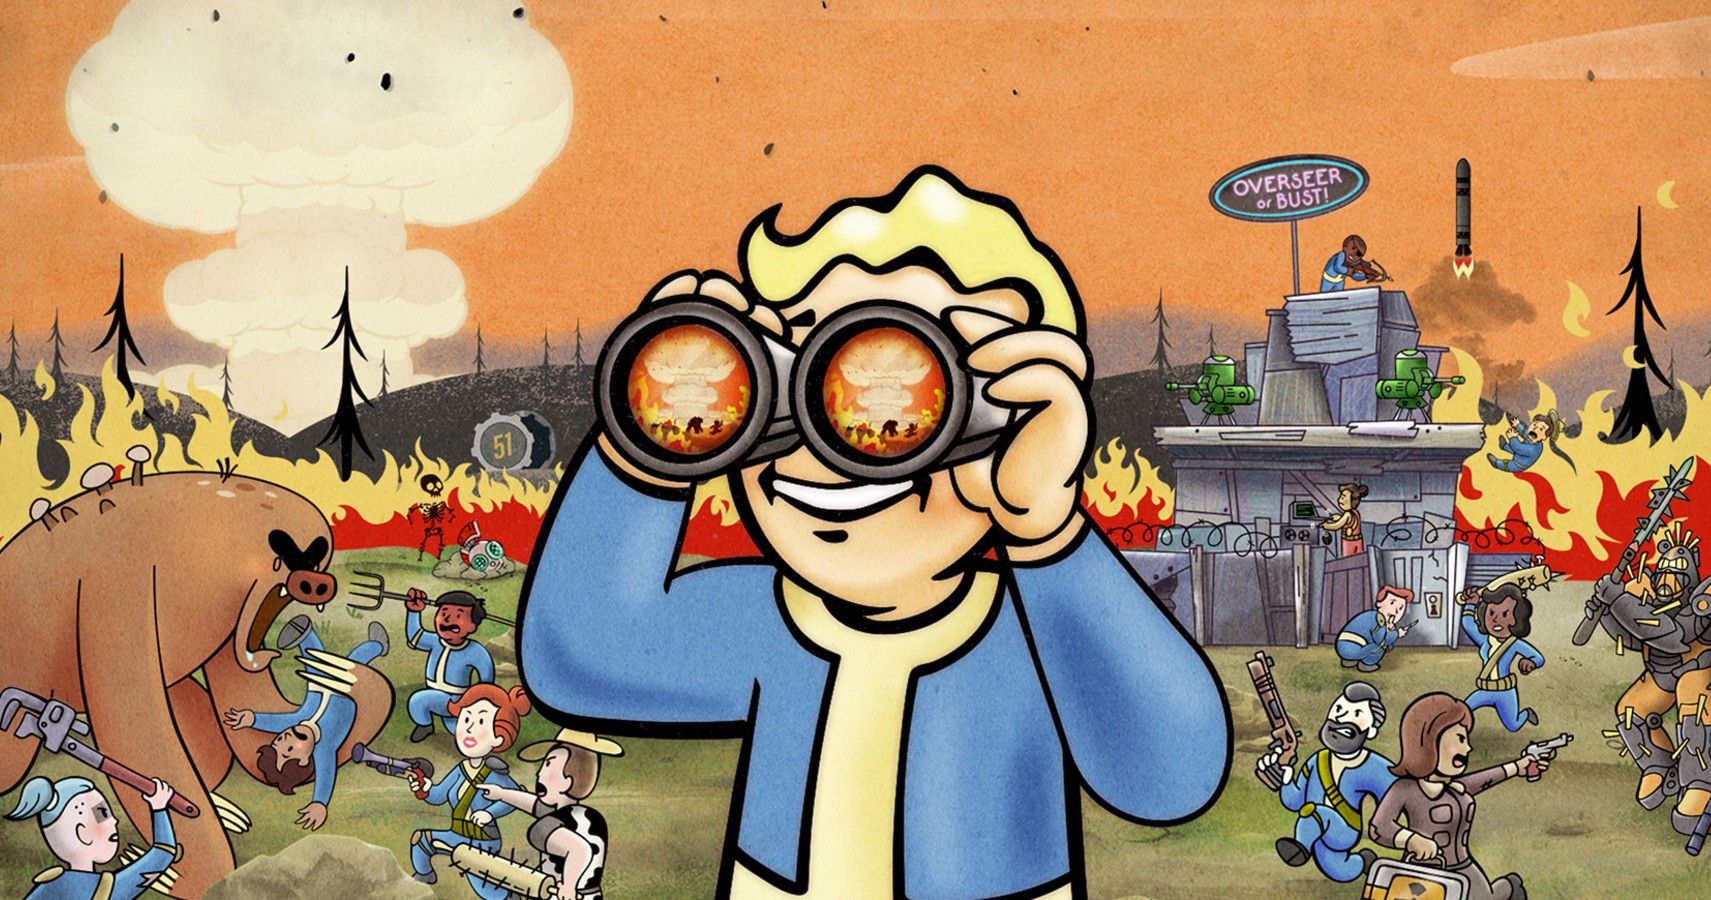 fallout 76 nuclear winter